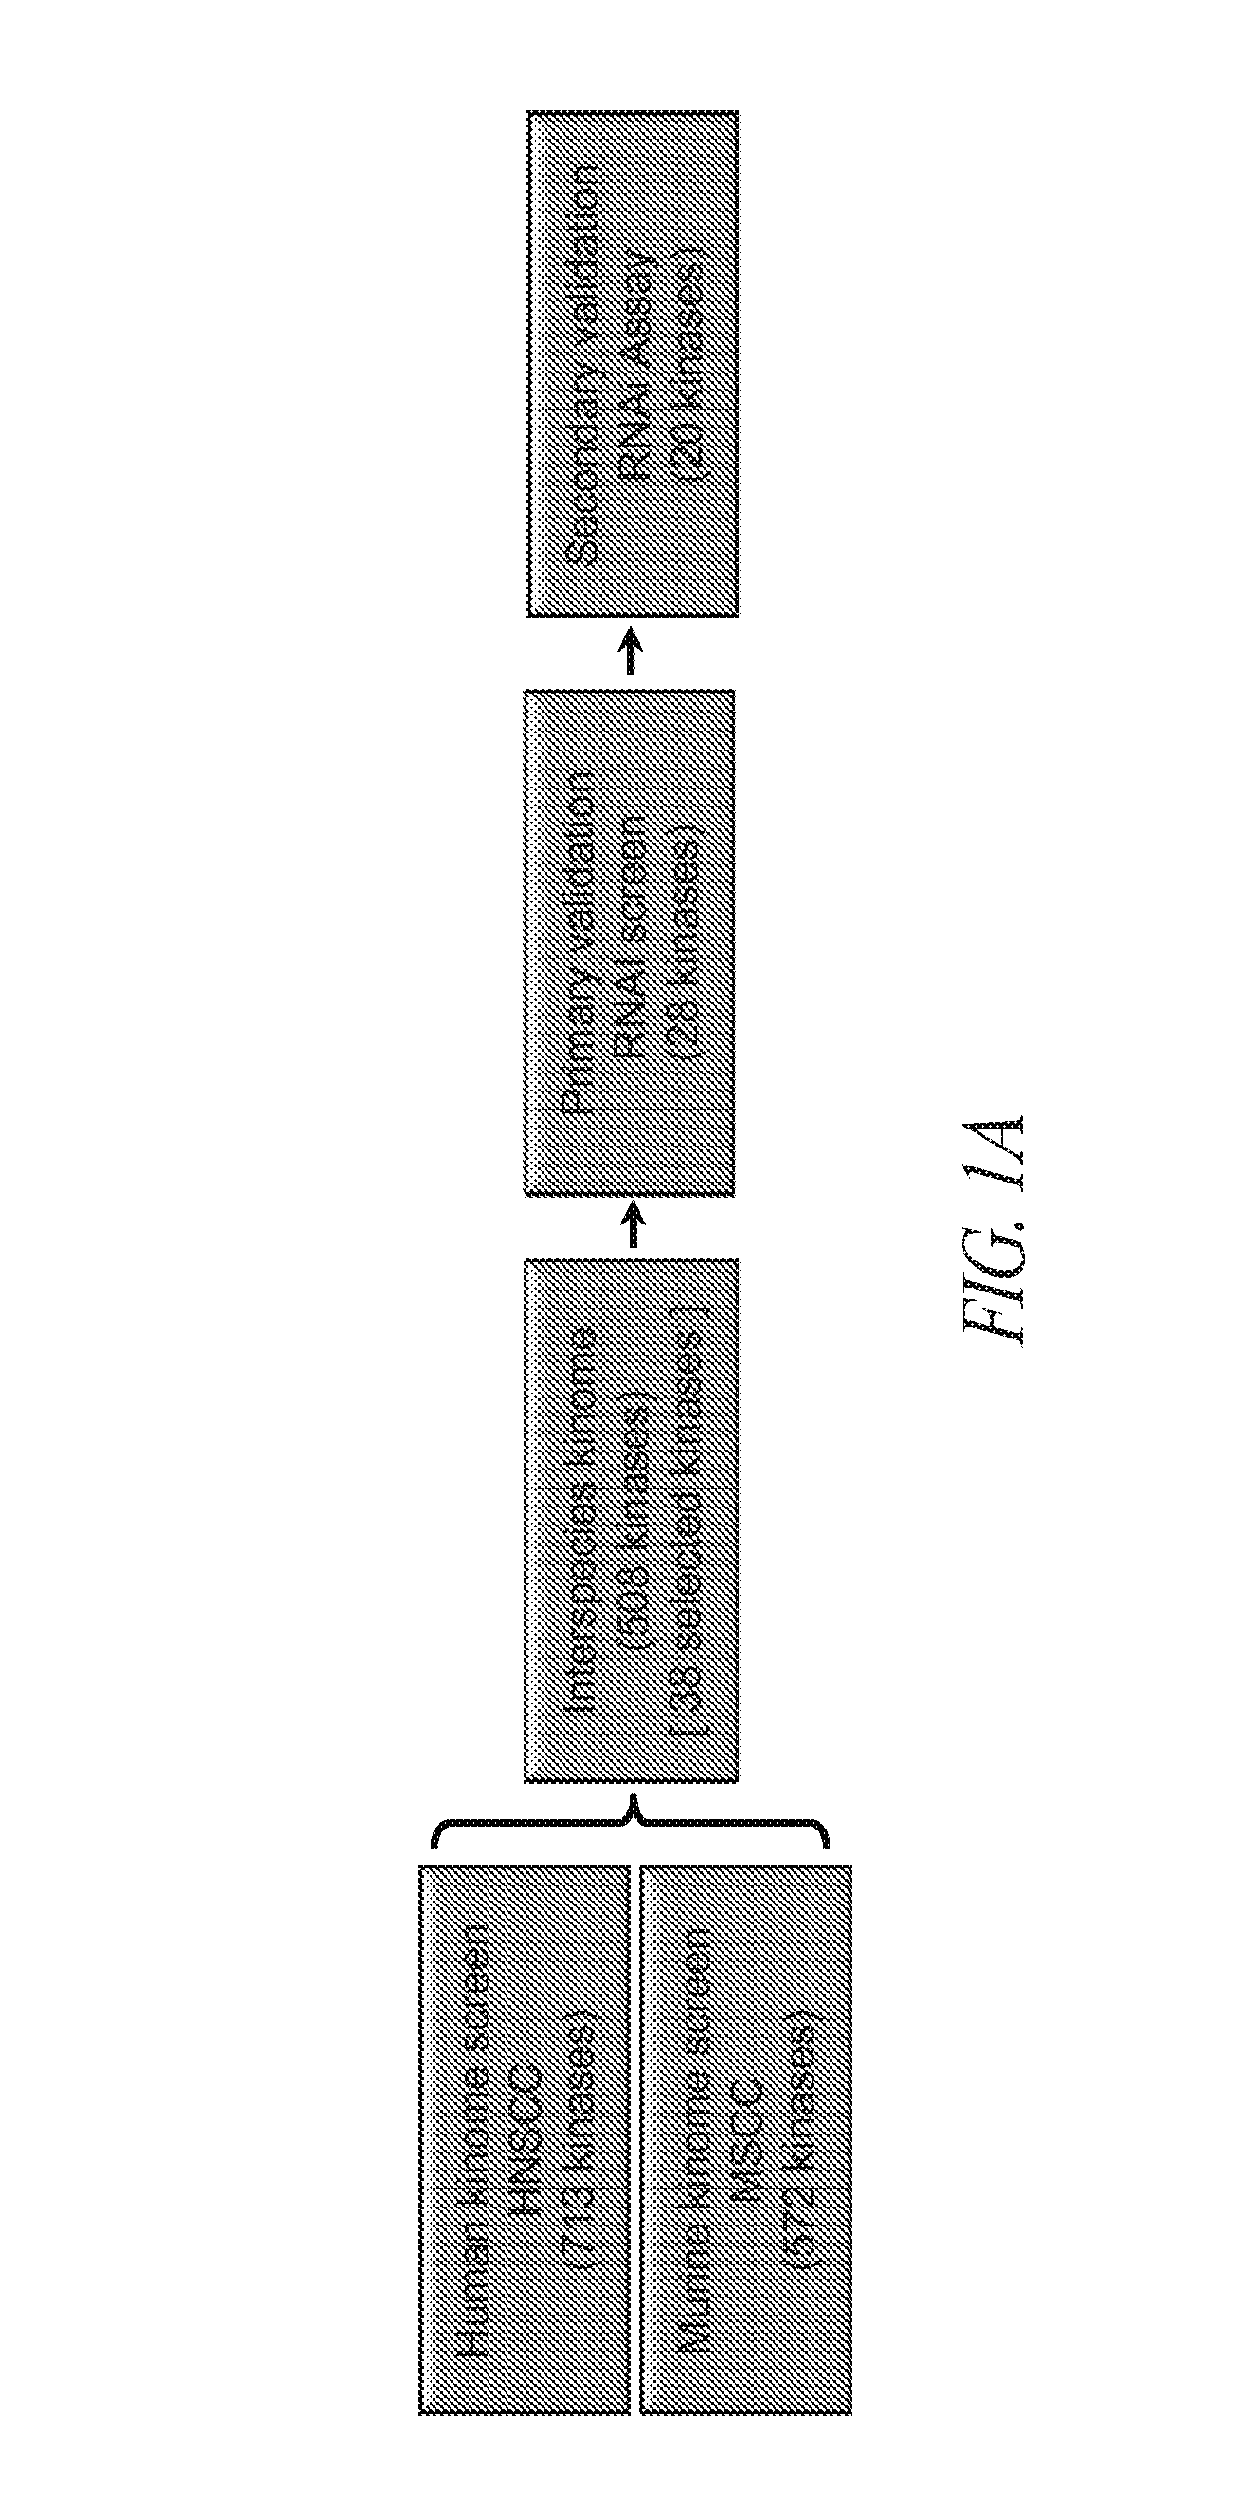 Methods for identifying therapeutic targets and treating monitoring cancers